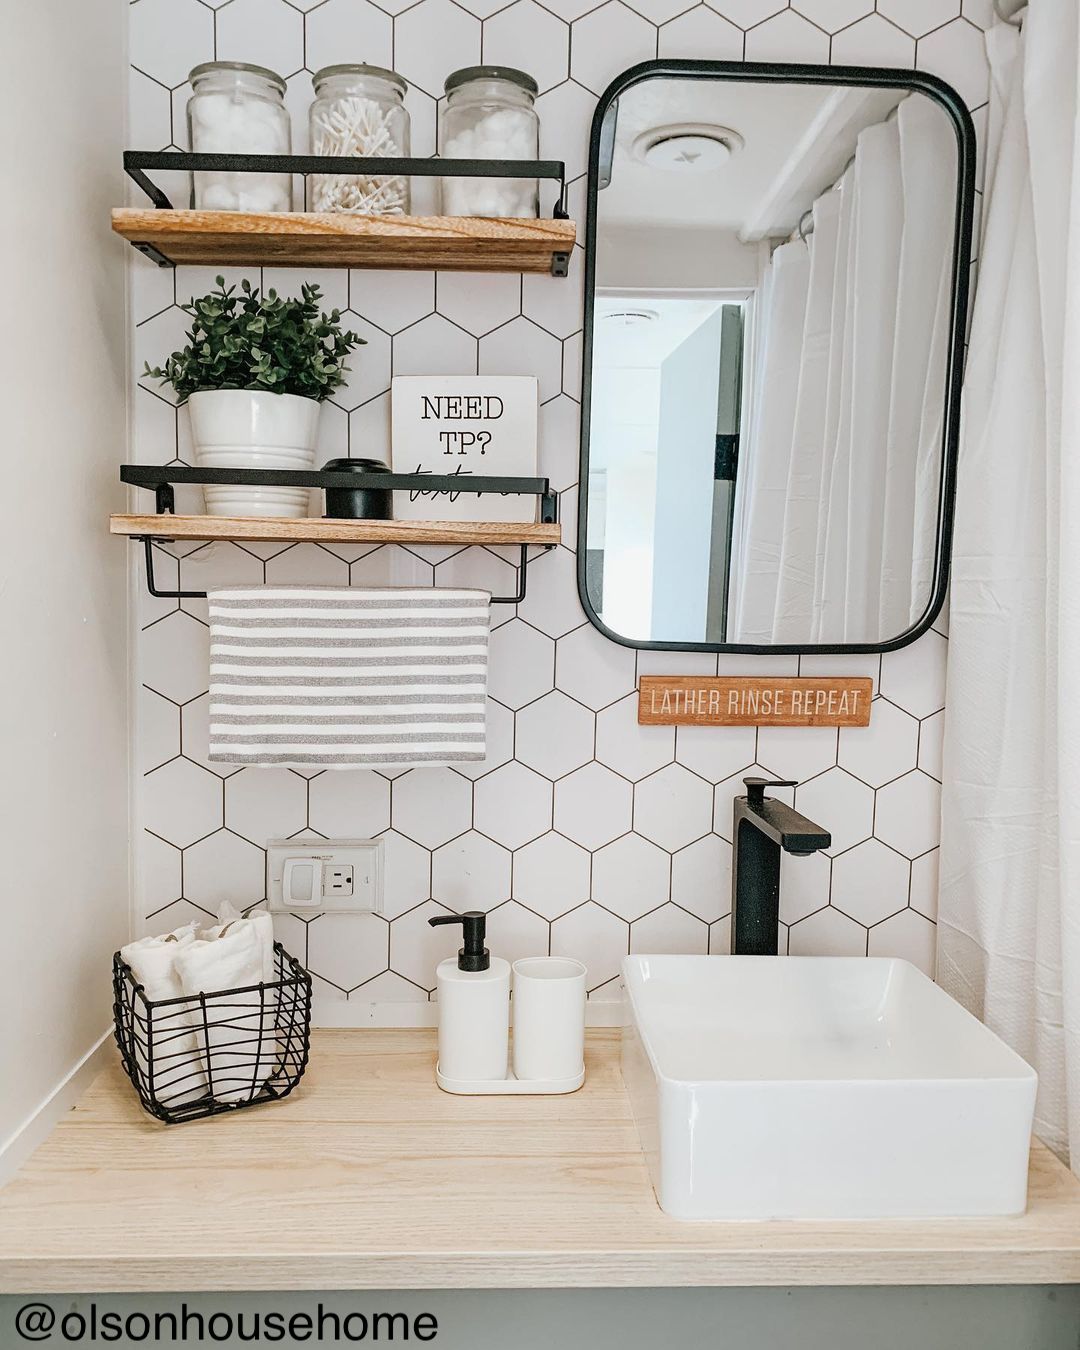 Chic renovation of a travel trailer bathroom with black and white decor.